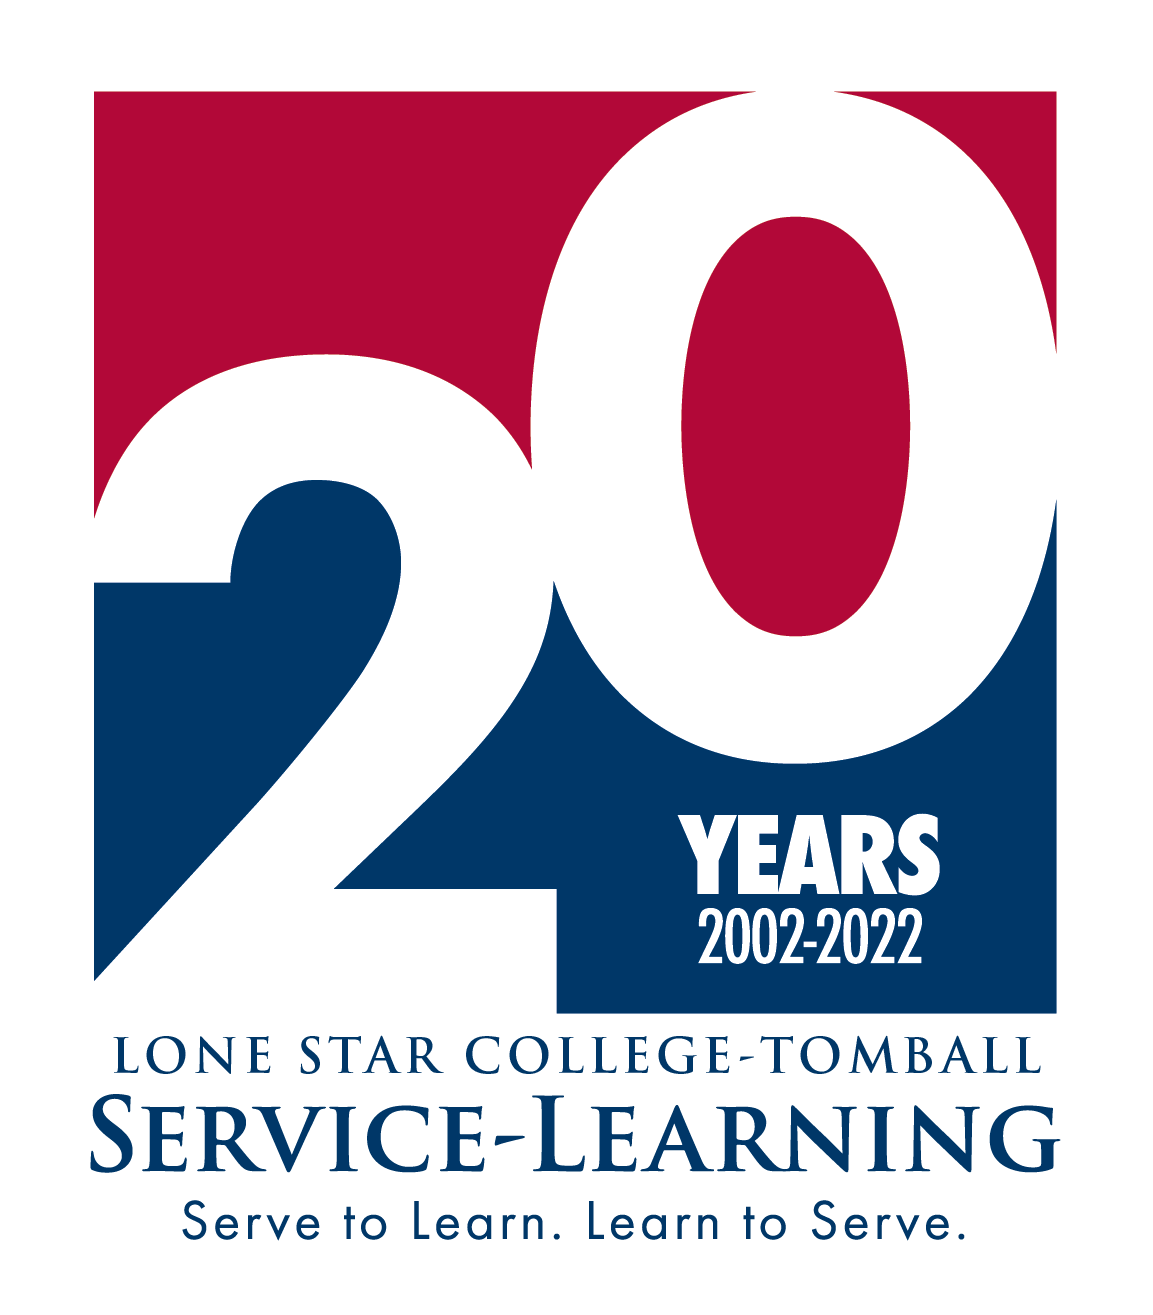 LSC-Tomball Service Learning 20 years, 2002-2022 logo. Serve to learn. Learn to serve. 